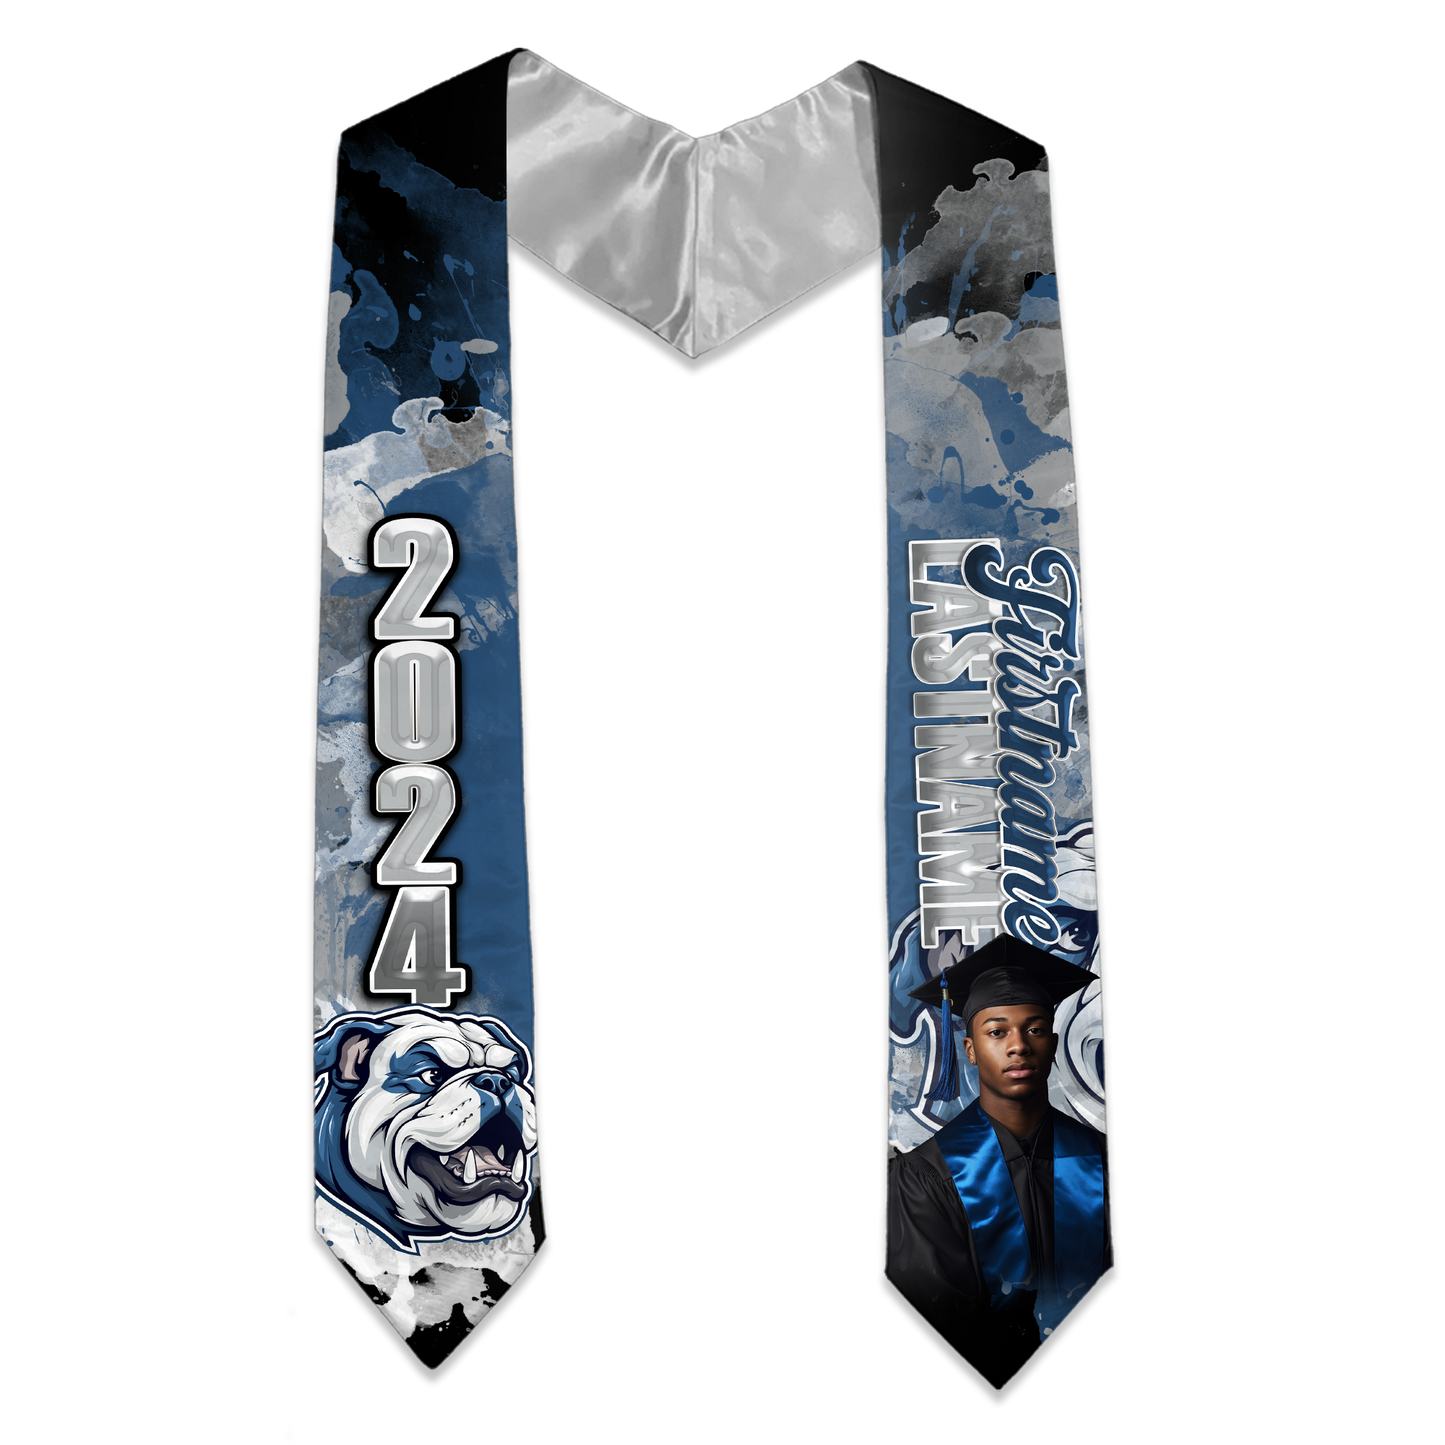 Camo Style Graduation Stole -Customize as your own